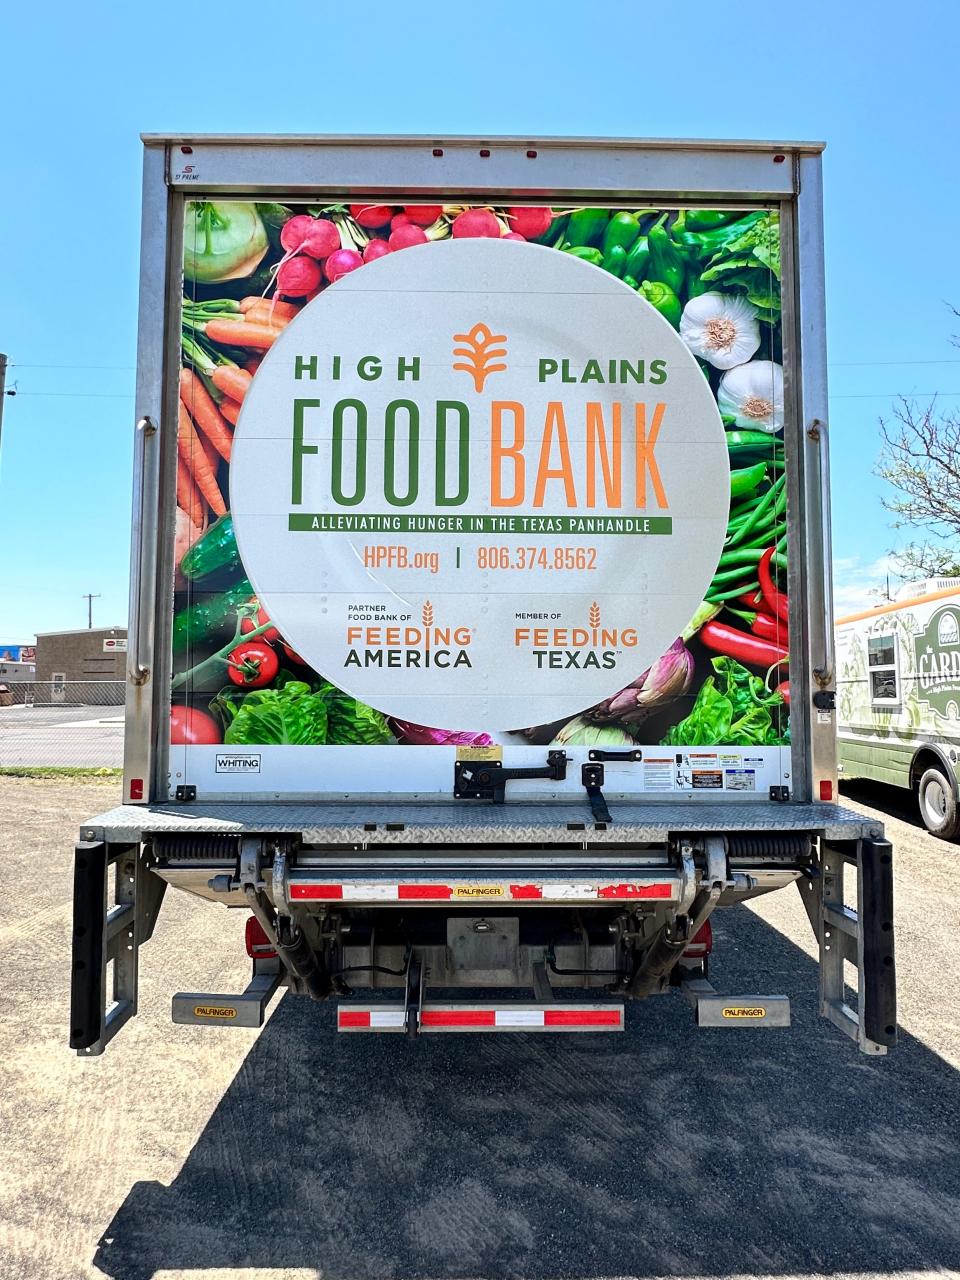 The High Plains Food Bank unveiled its new truck for the Commodity Supplemental Food Program on Friday. The food bank recieved a $69,000 donation from the Jane Phillips Society toward the truck in August, they are now offering more meal plans for area senior citizens.